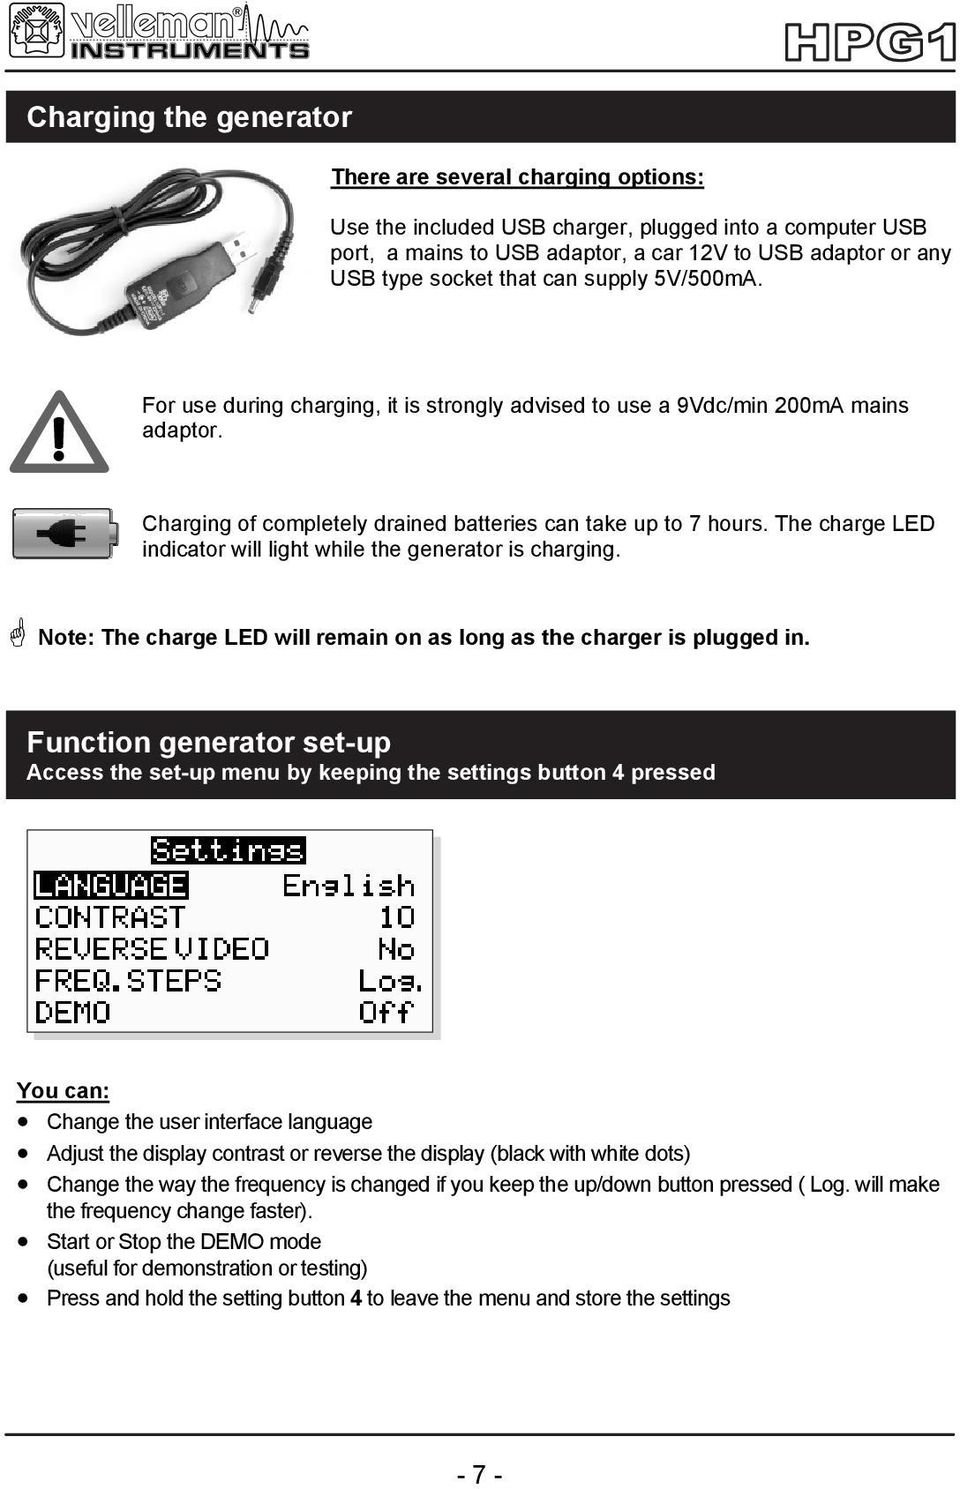 The charge LED indicator will light while the generator is charging. Note: The charge LED will remain on as long as the charger is plugged in.